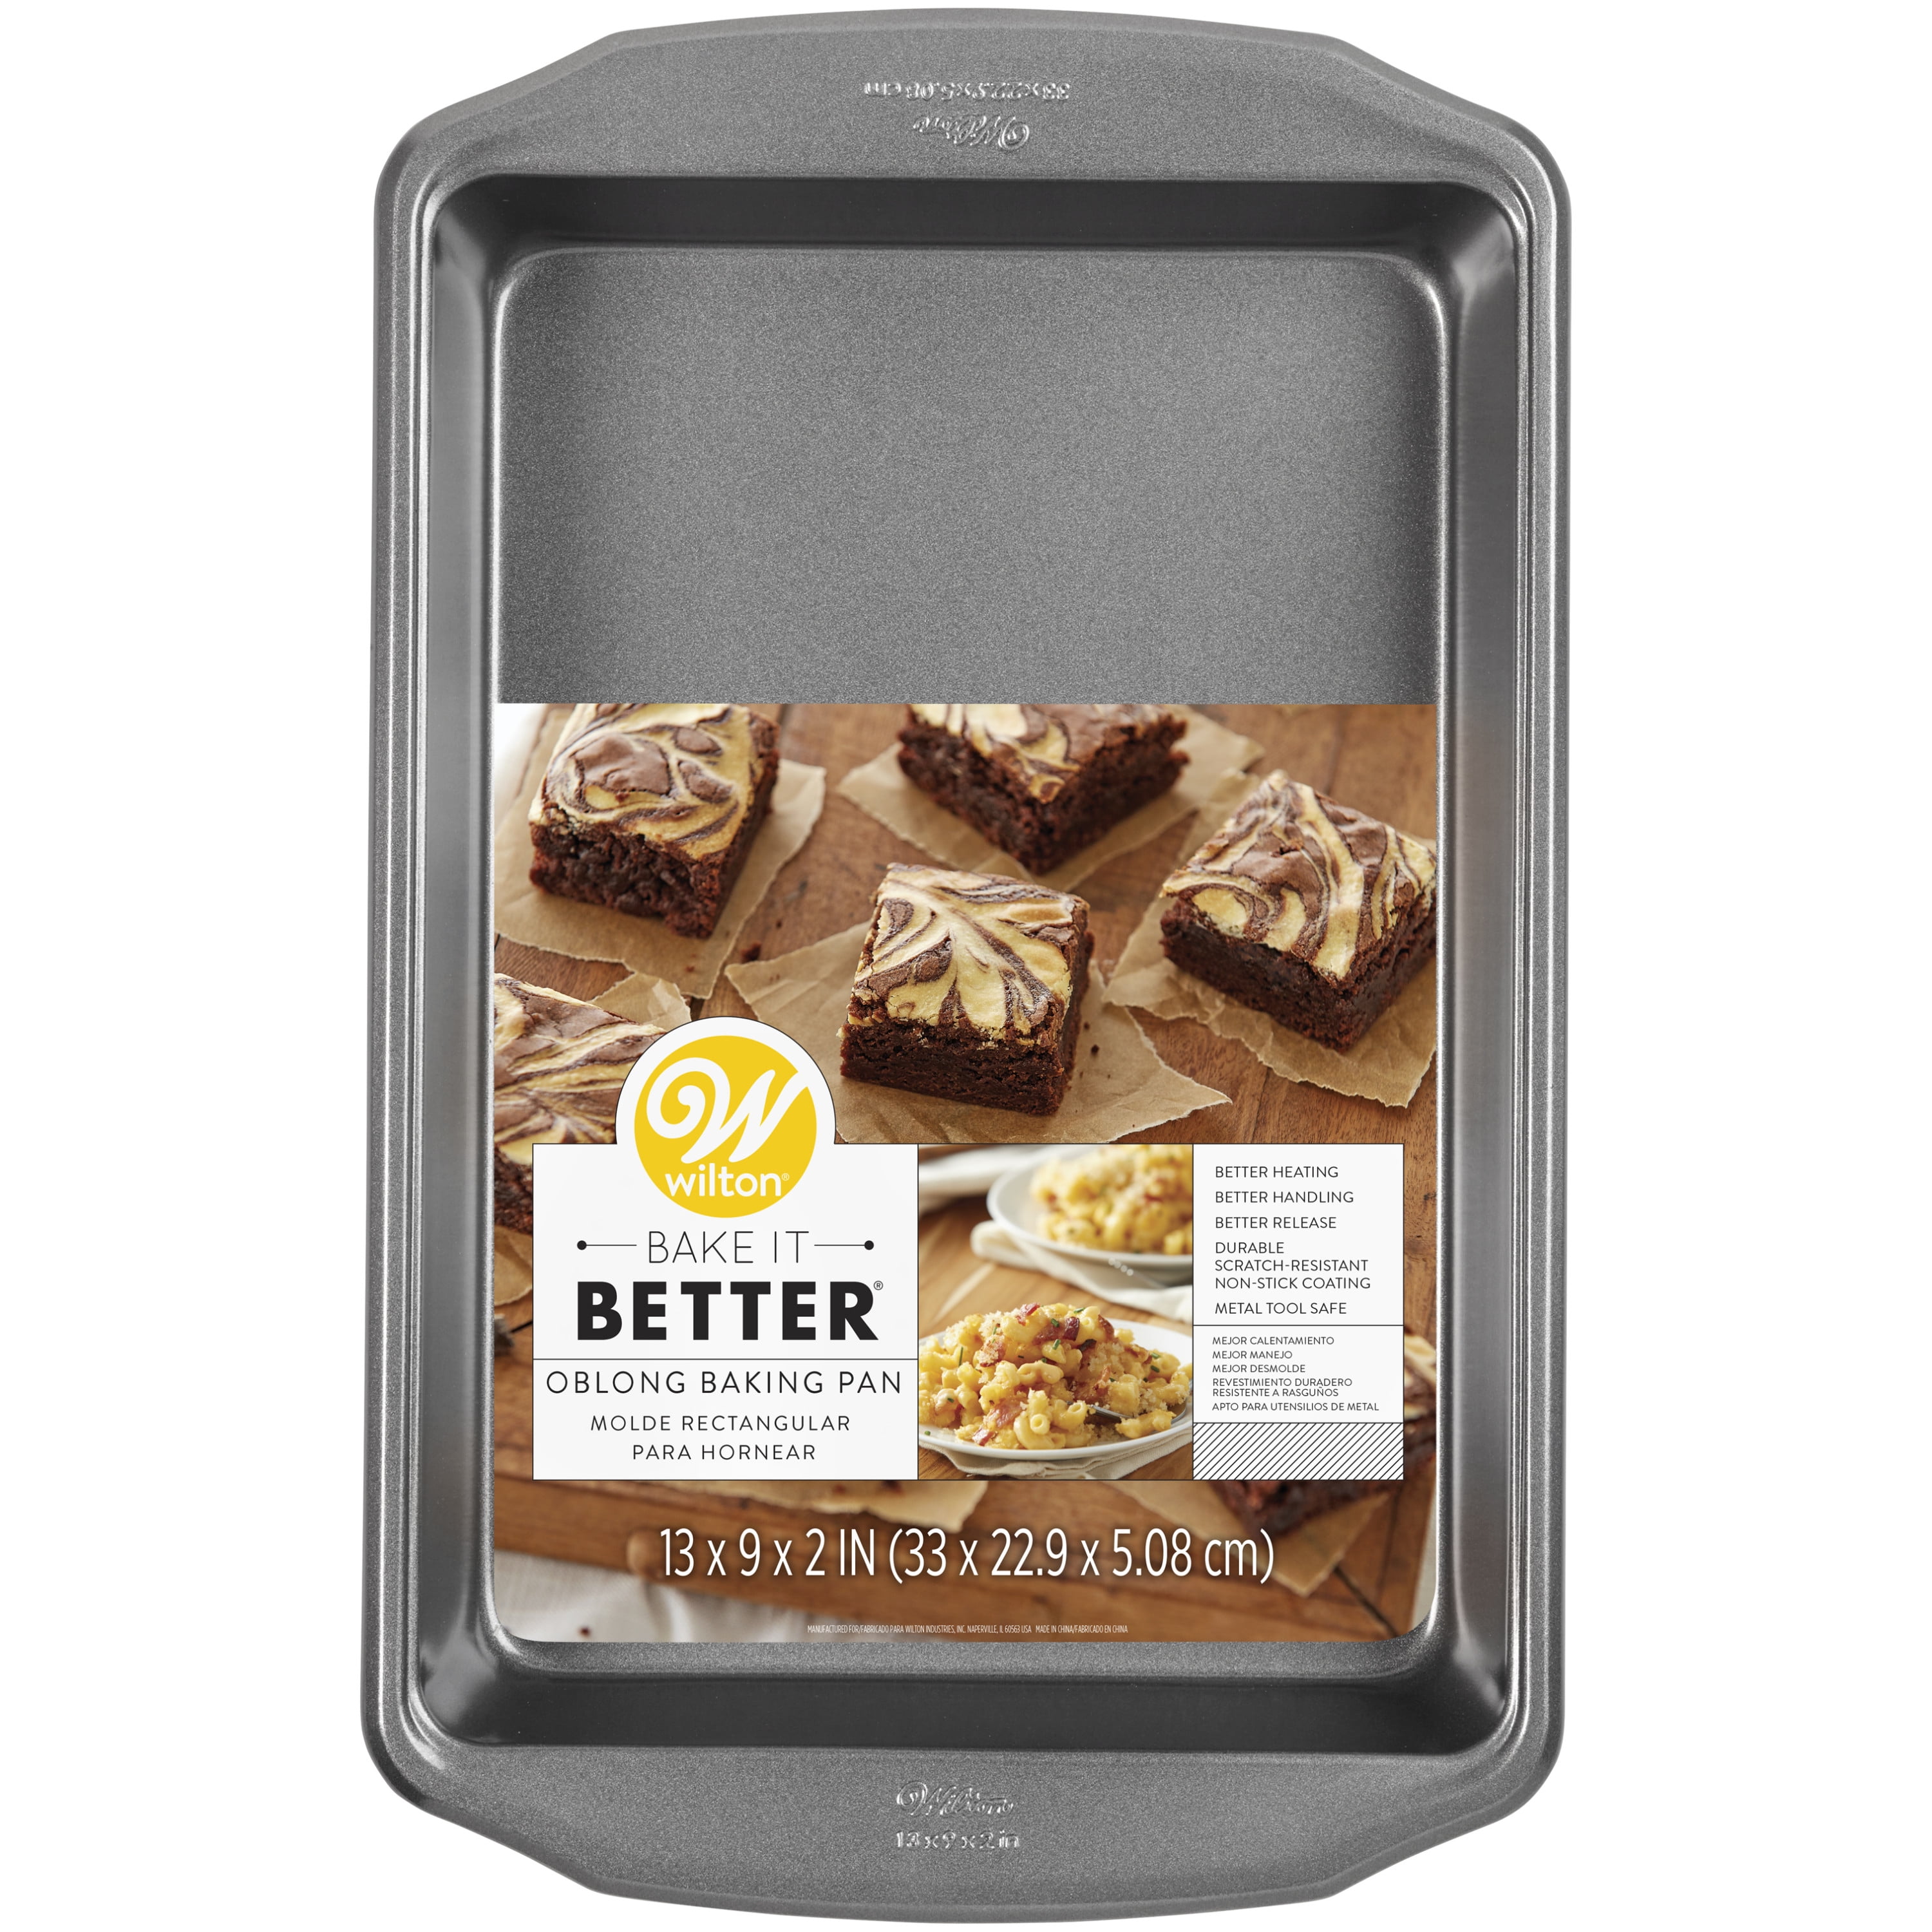 Wilton Bake it Better Steel Non-Stick Oblong Cake Pan with Lid, 13